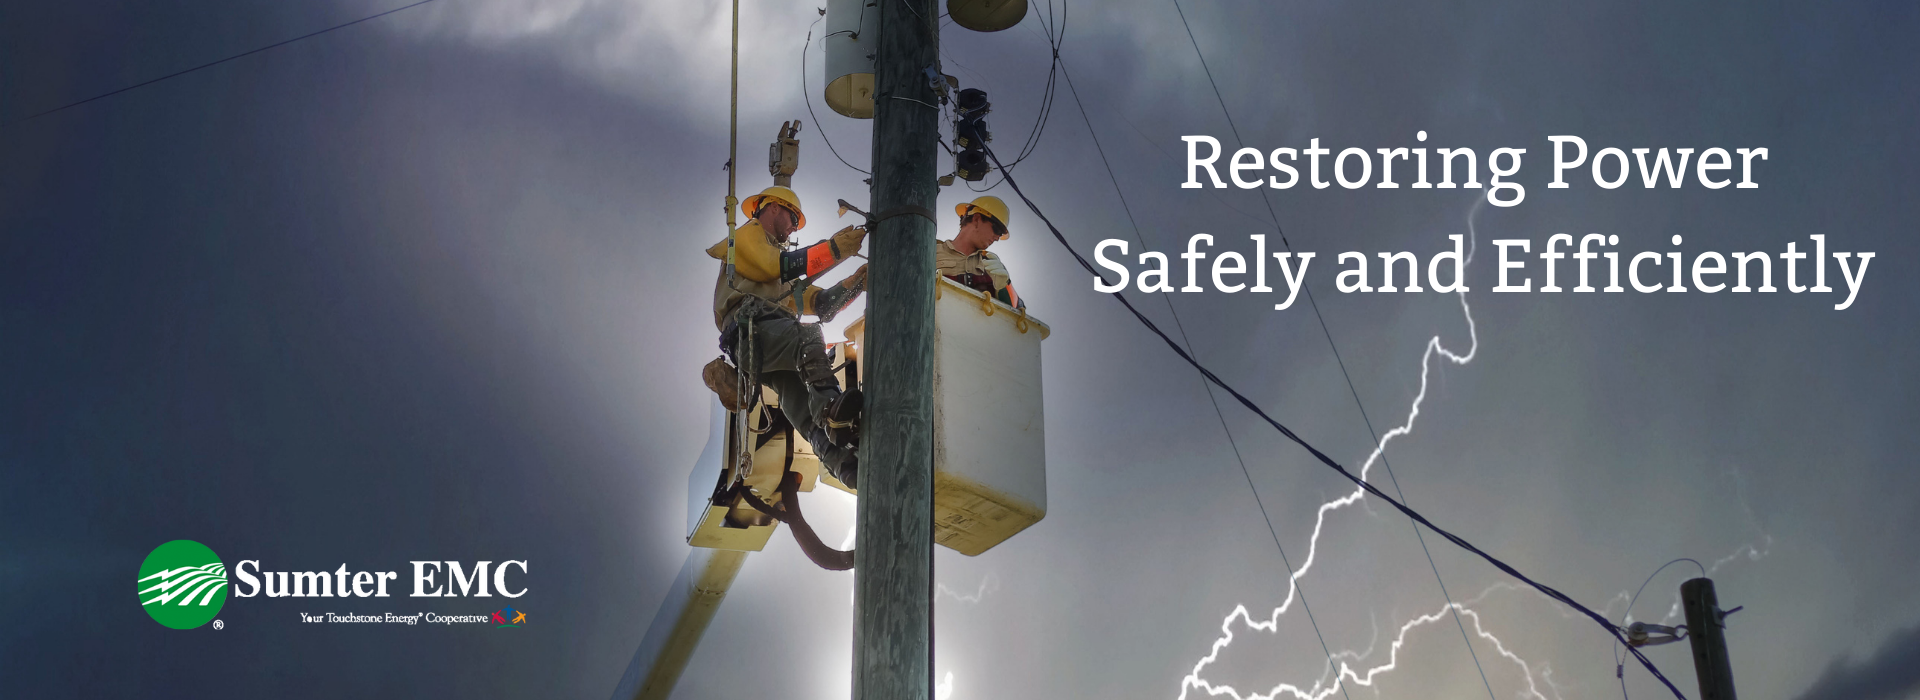 Restoring Power Safely and Efficiently